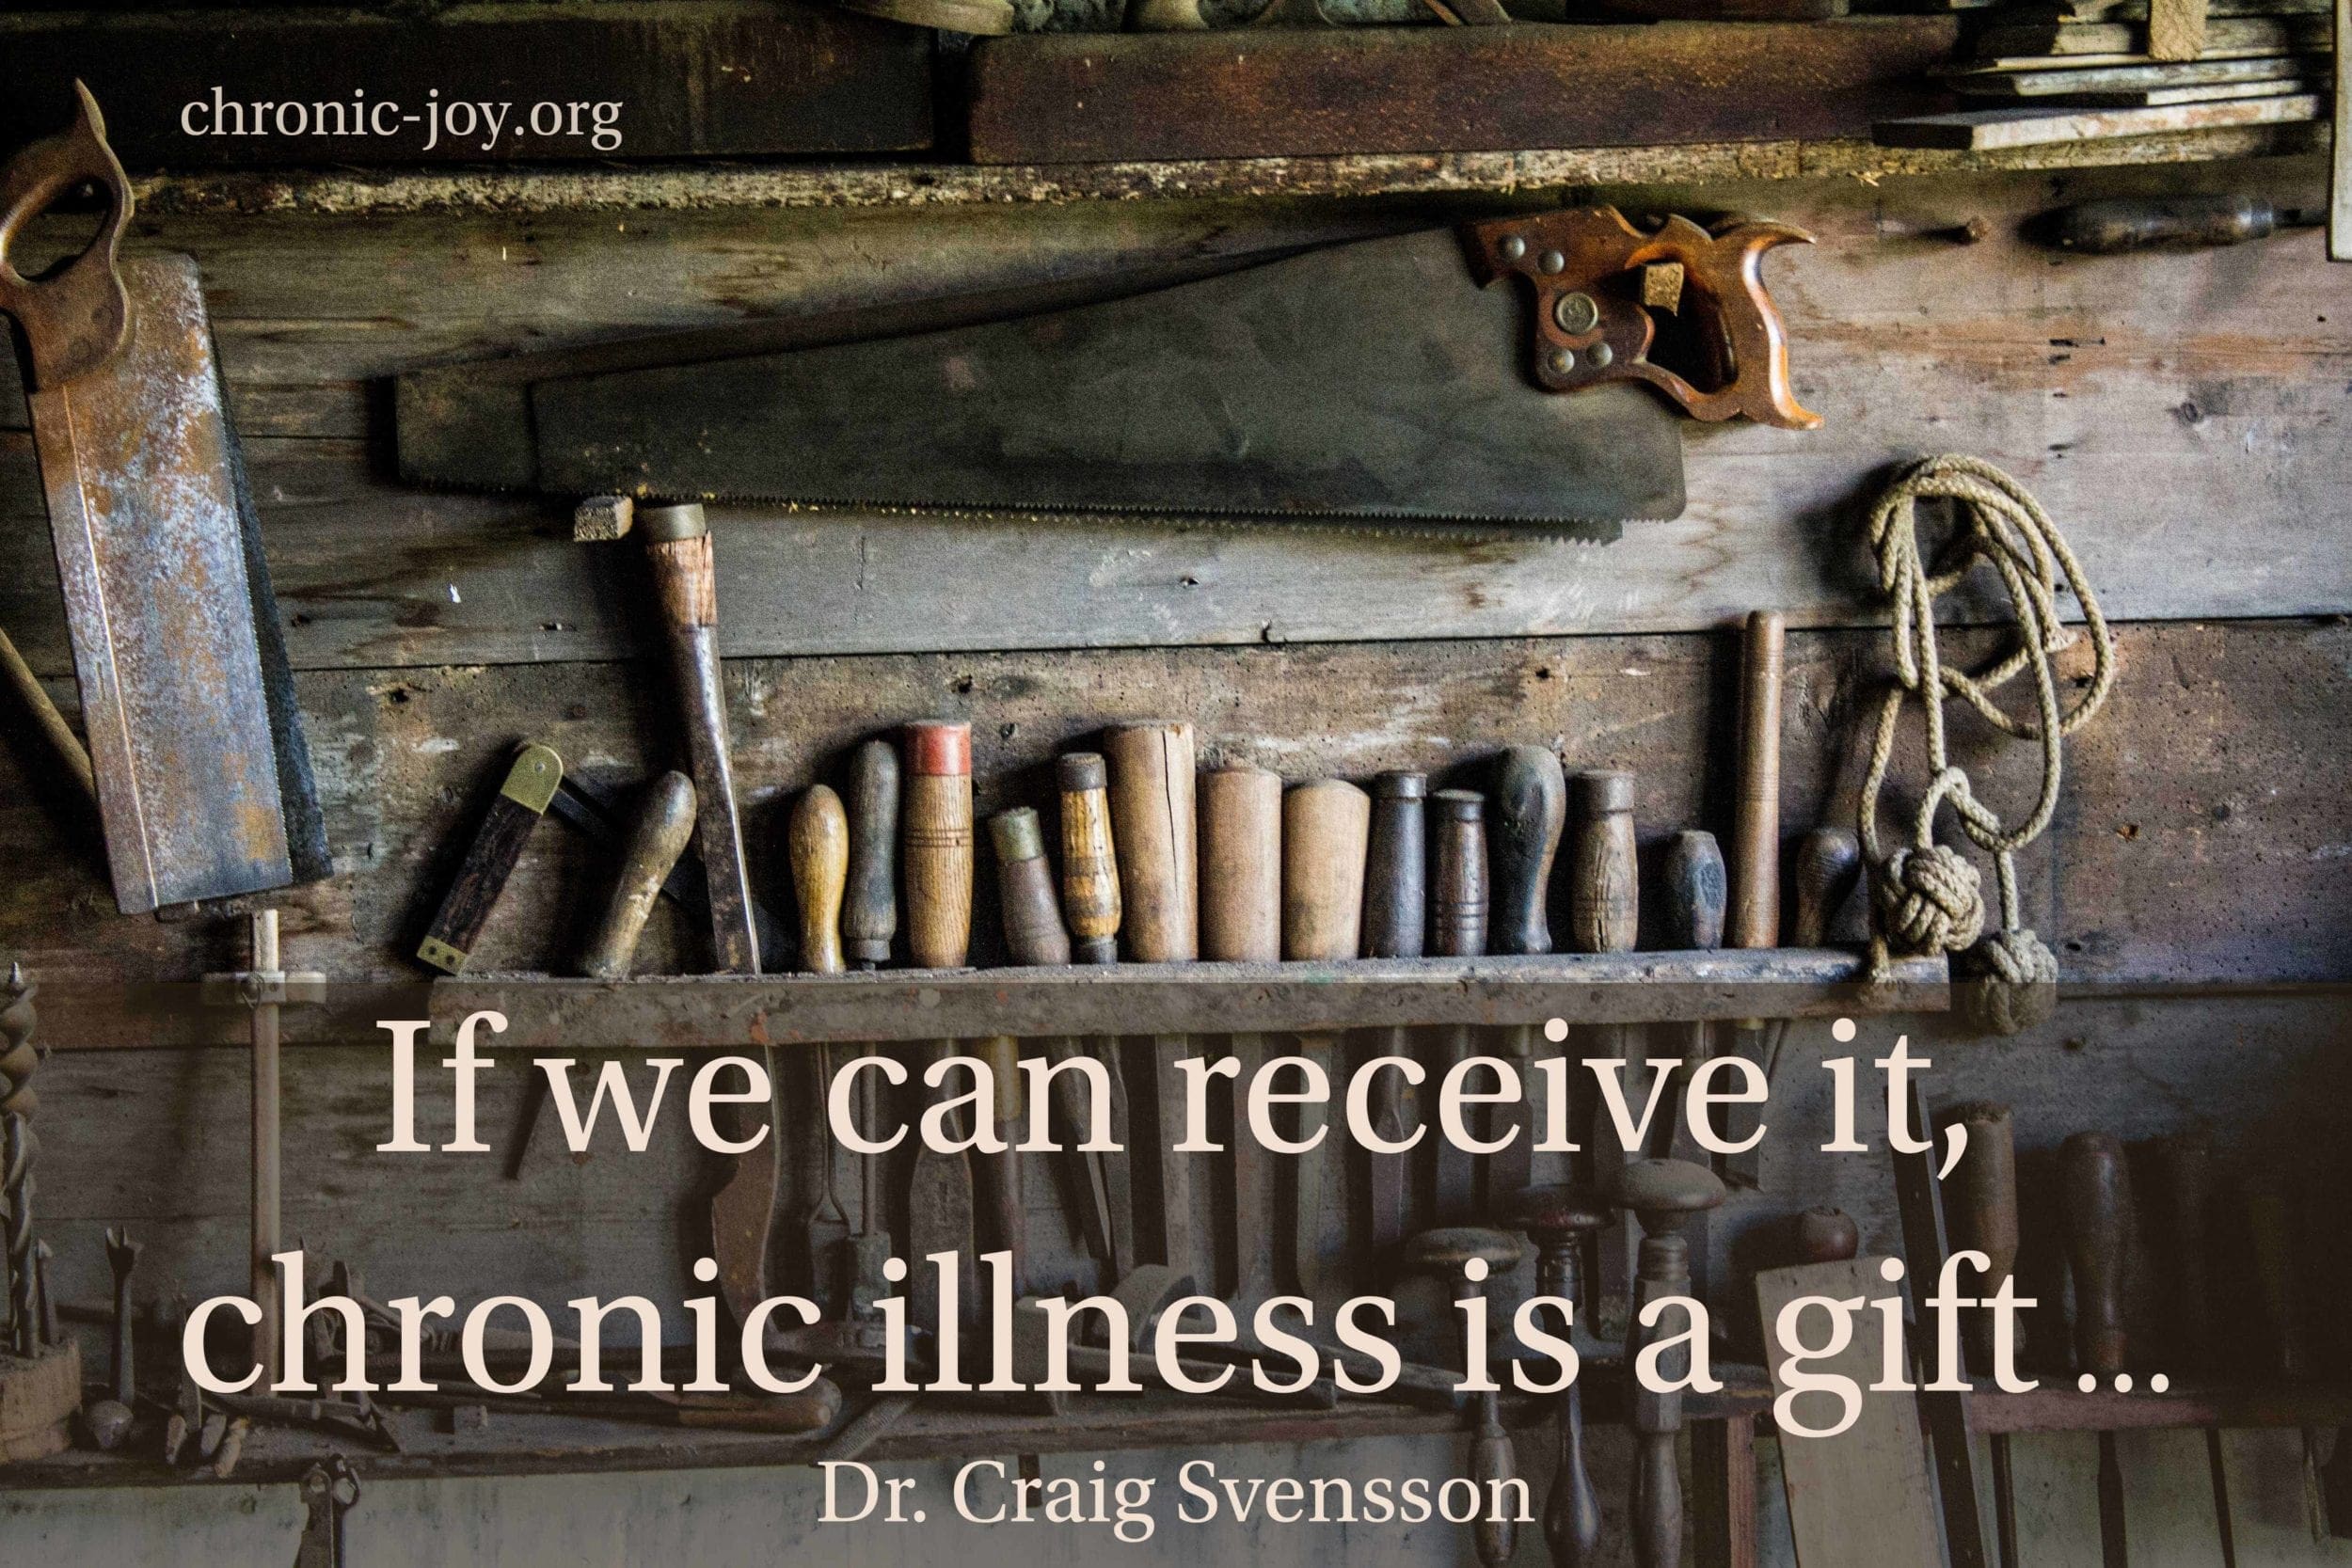 If we can receive it, chronic illness is a gift ...